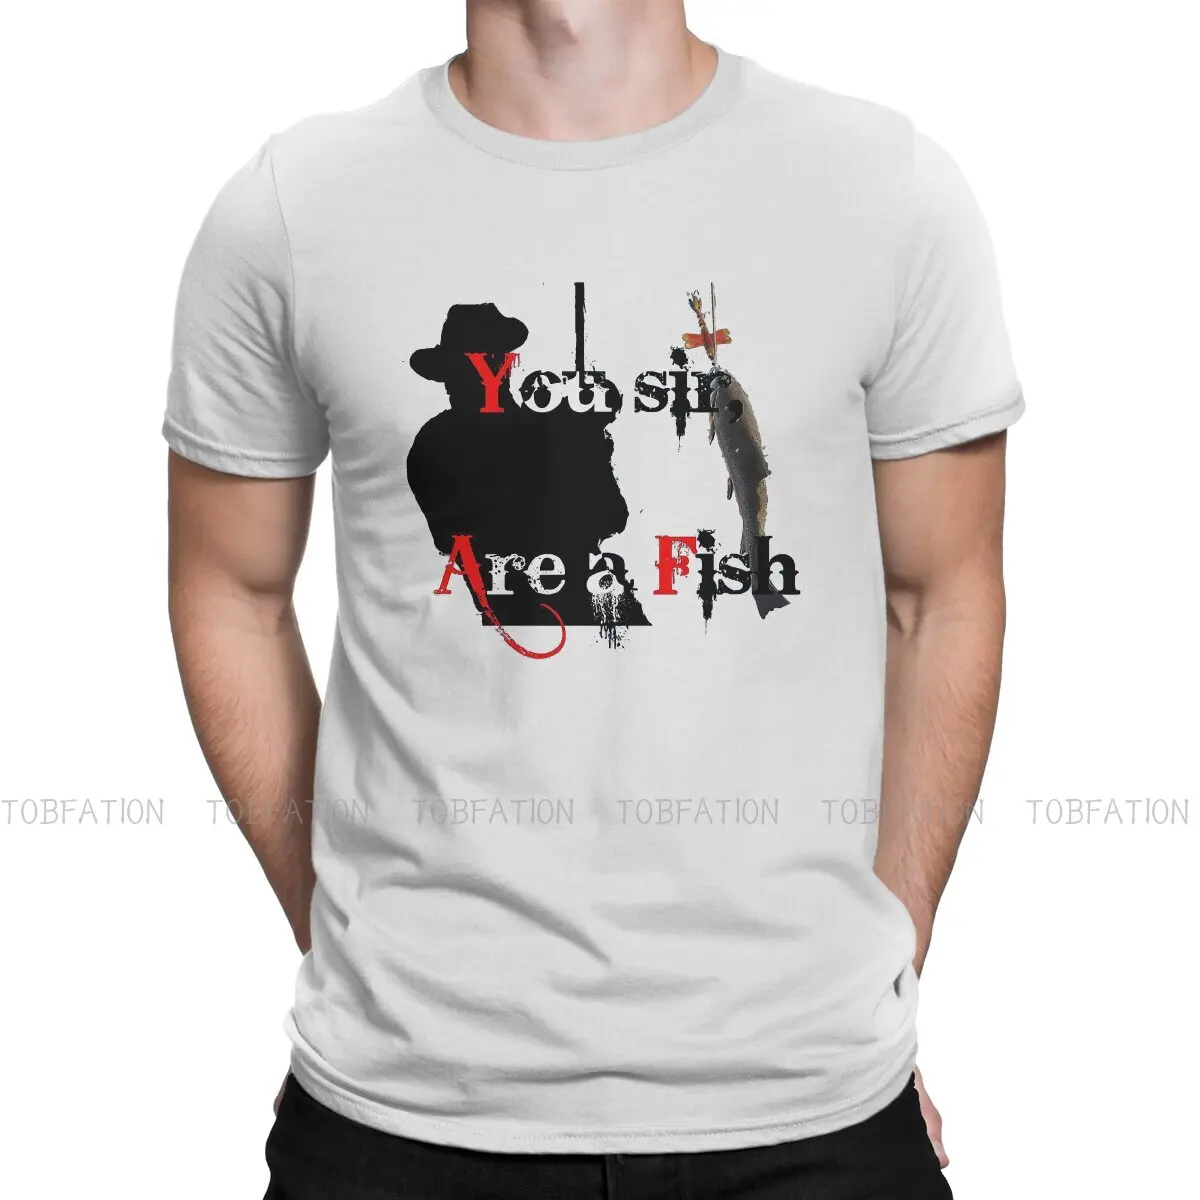 

You Sir Are a FIsh Hipster TShirts Red Dead Redemption Men Harajuku Fabric Streetwear T Shirt O Neck